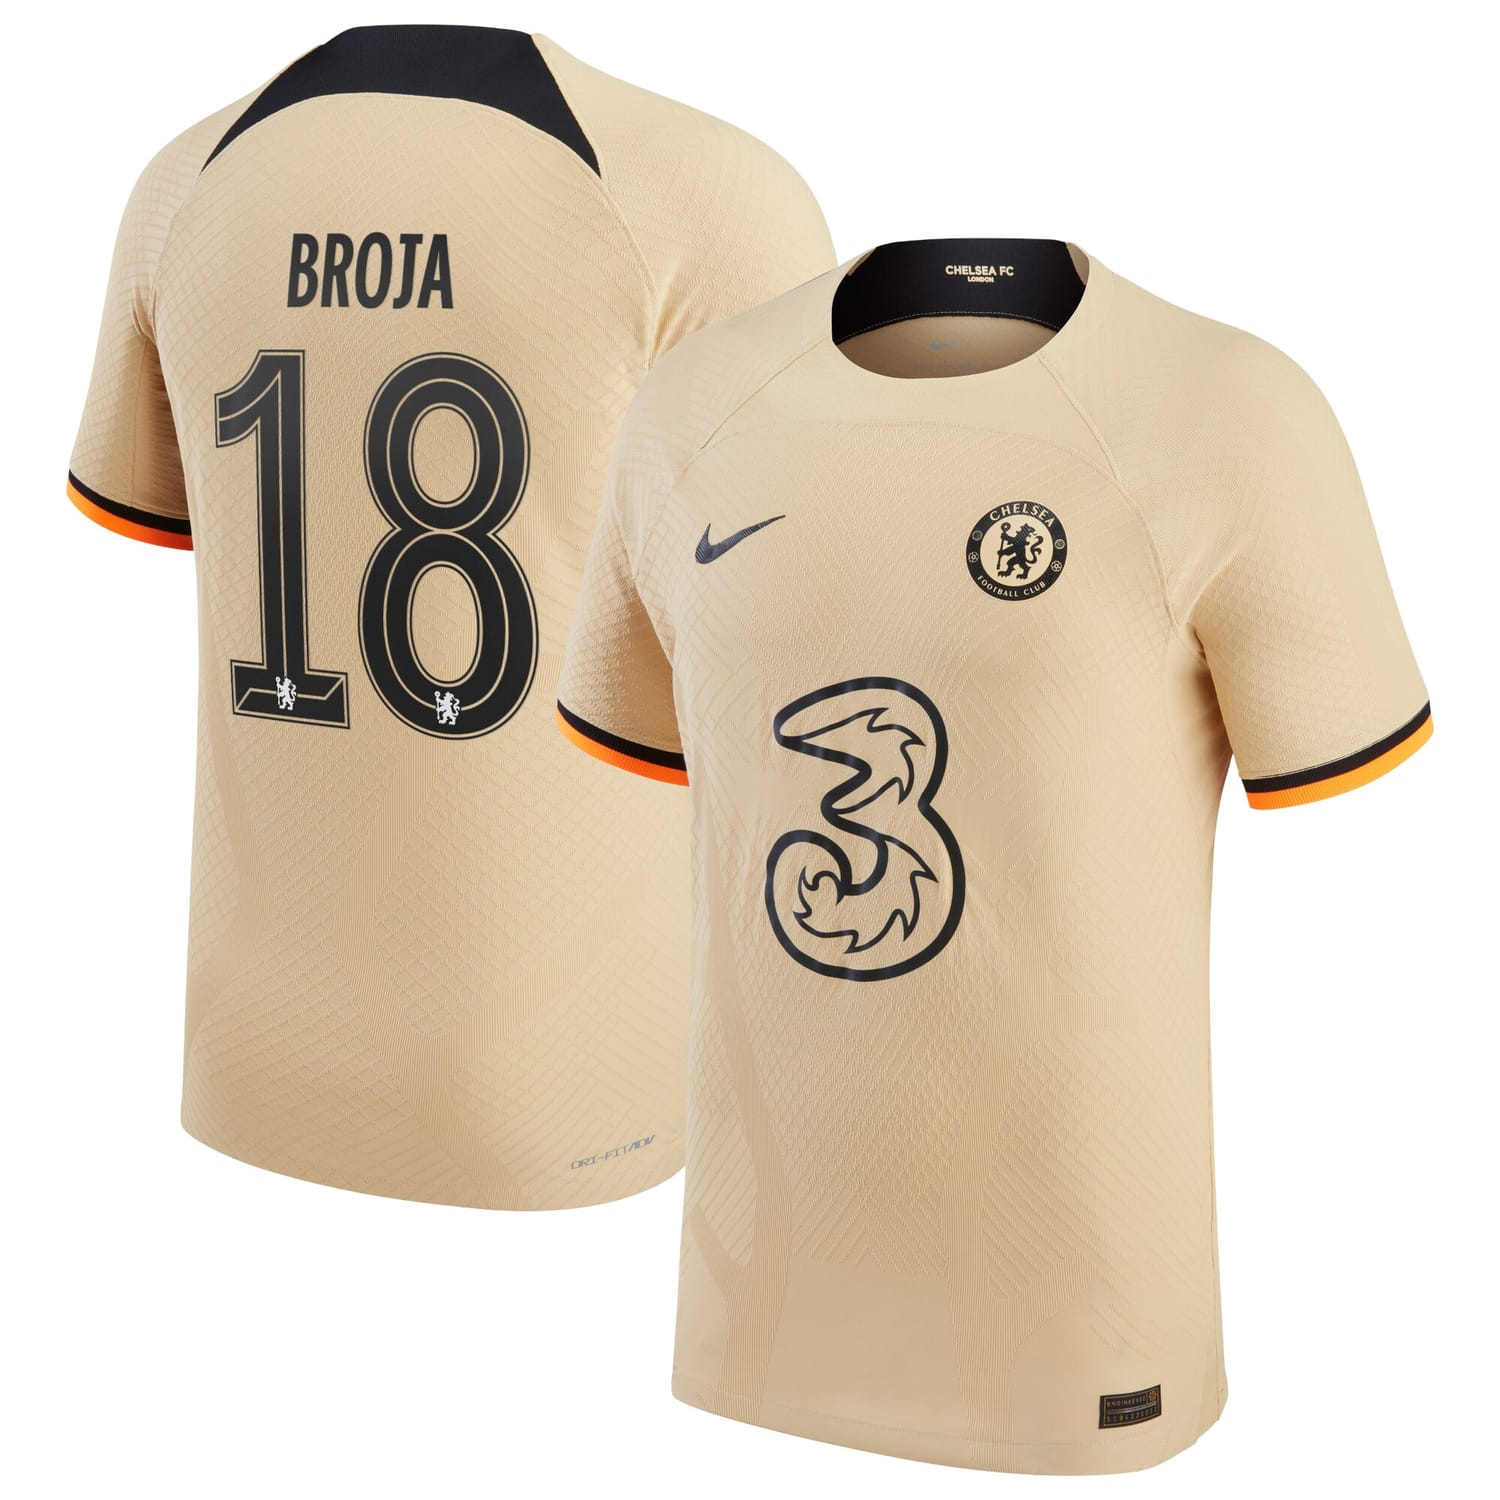 Premier League Chelsea Third Cup Authentic Jersey Shirt 2022-23 player Armando Broja 18 printing for Men